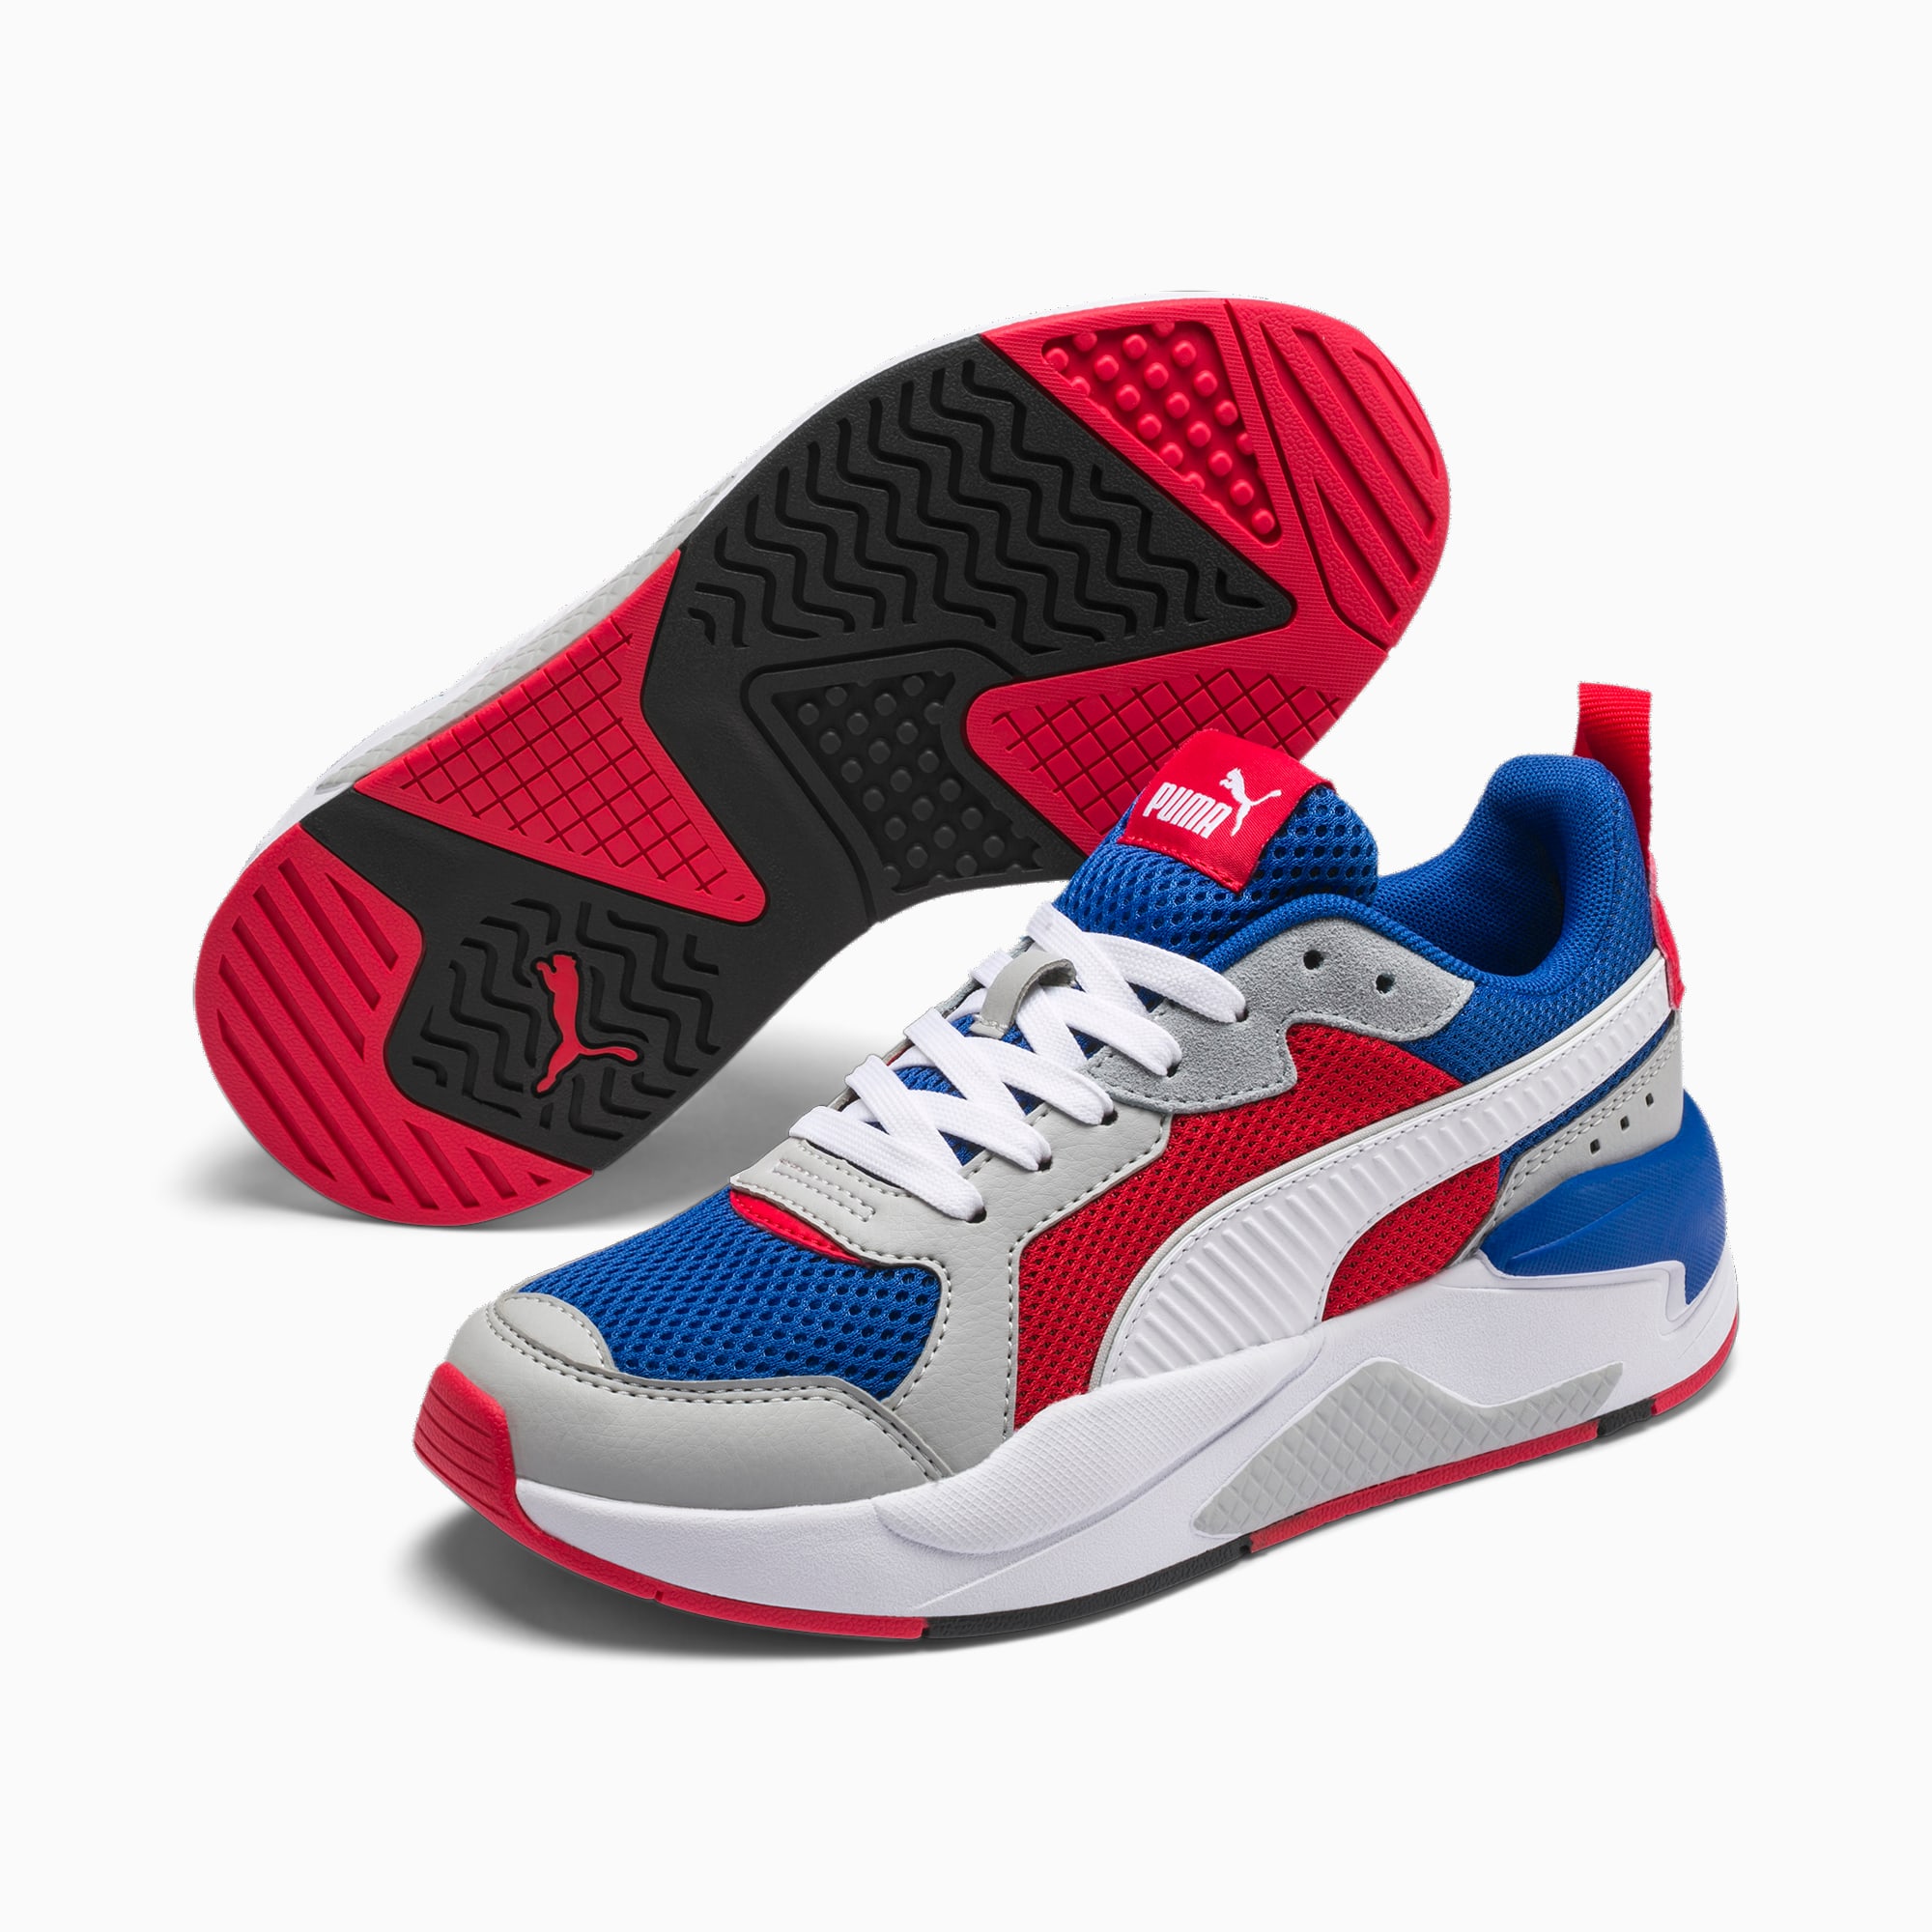 puma x ray shoes Online Sale, UP TO 73% OFF